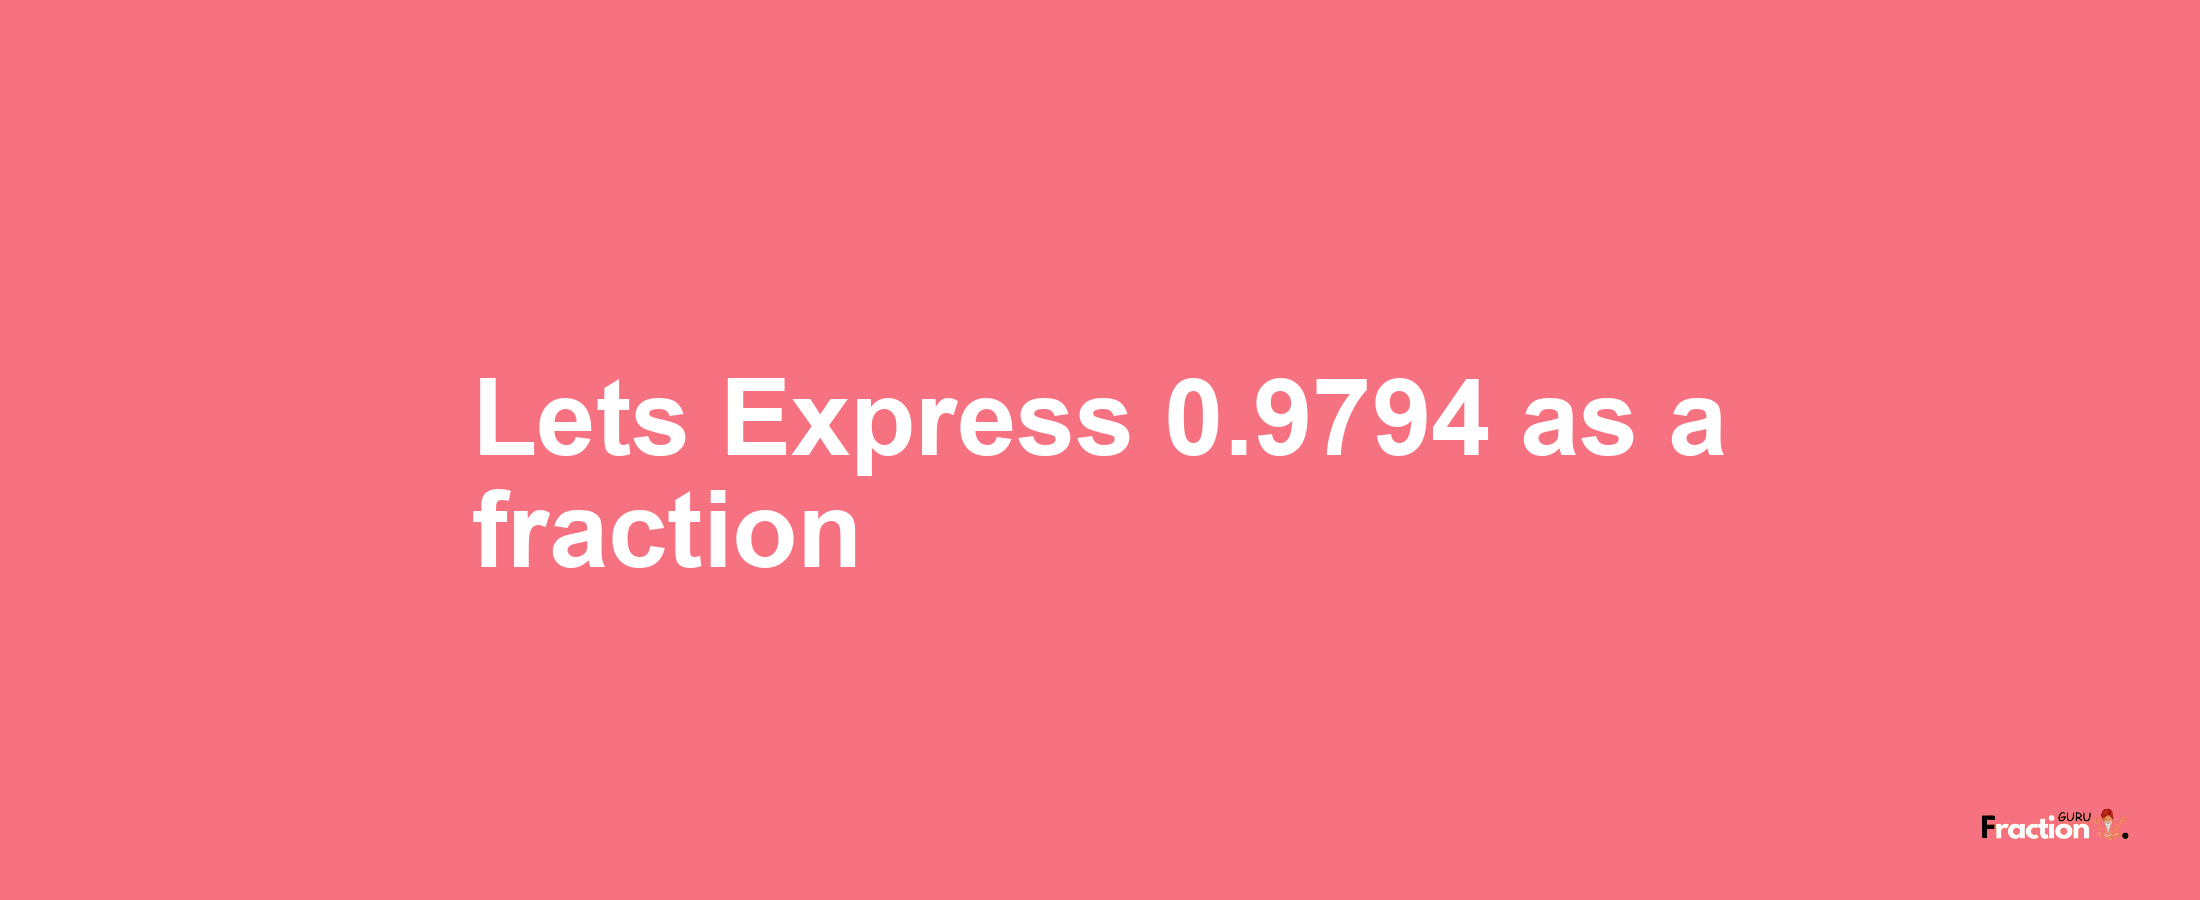 Lets Express 0.9794 as afraction